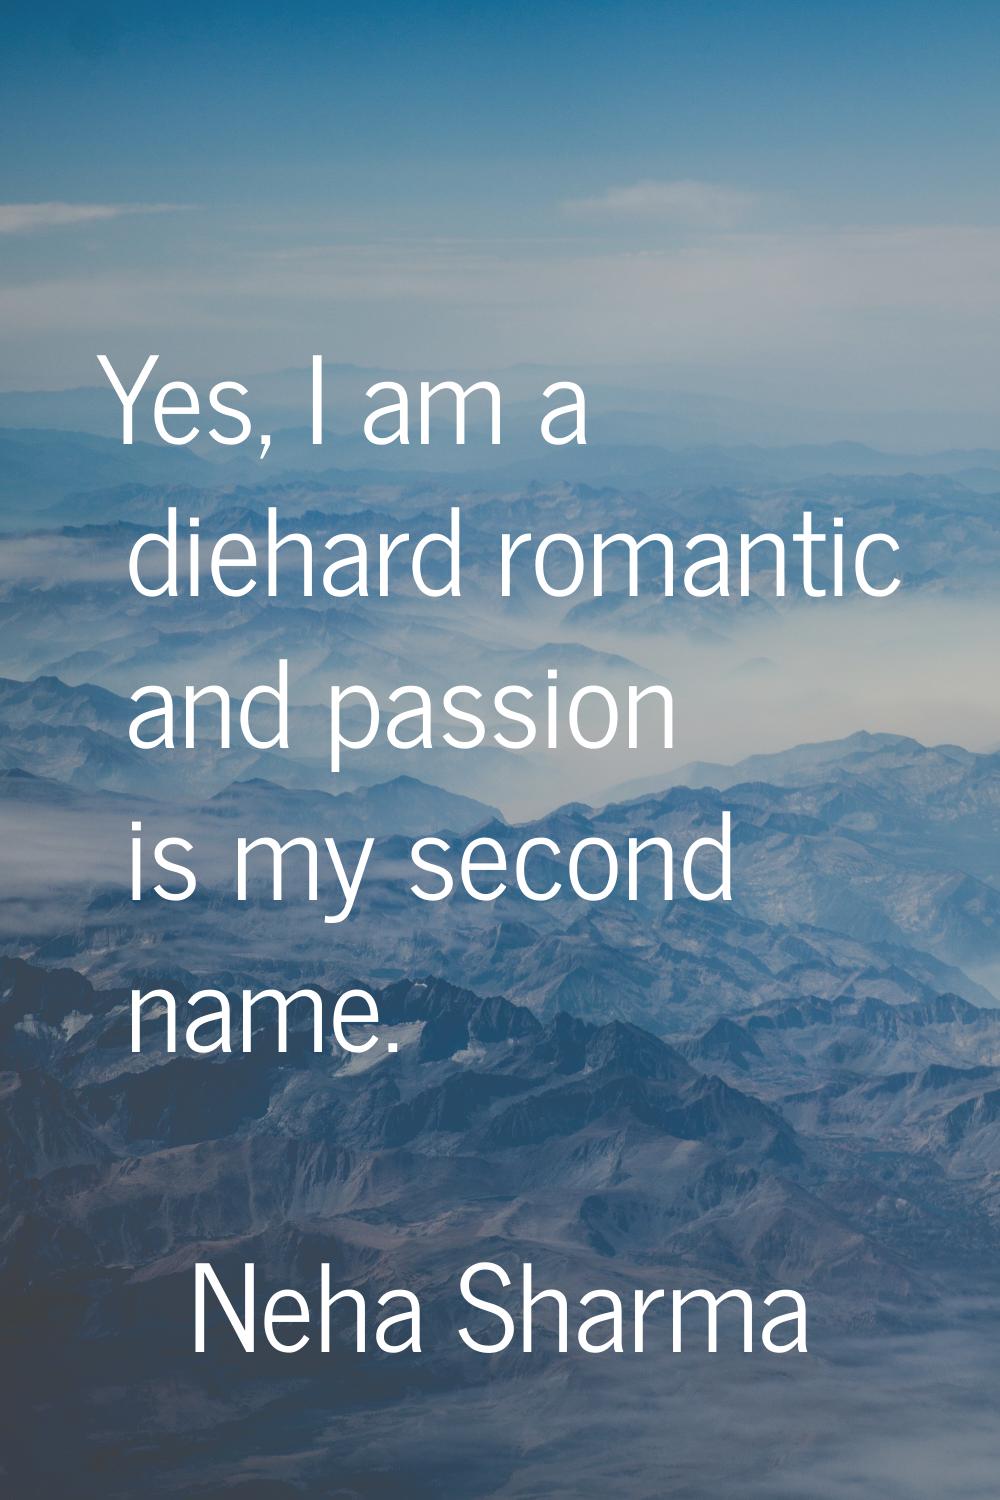 Yes, I am a diehard romantic and passion is my second name.